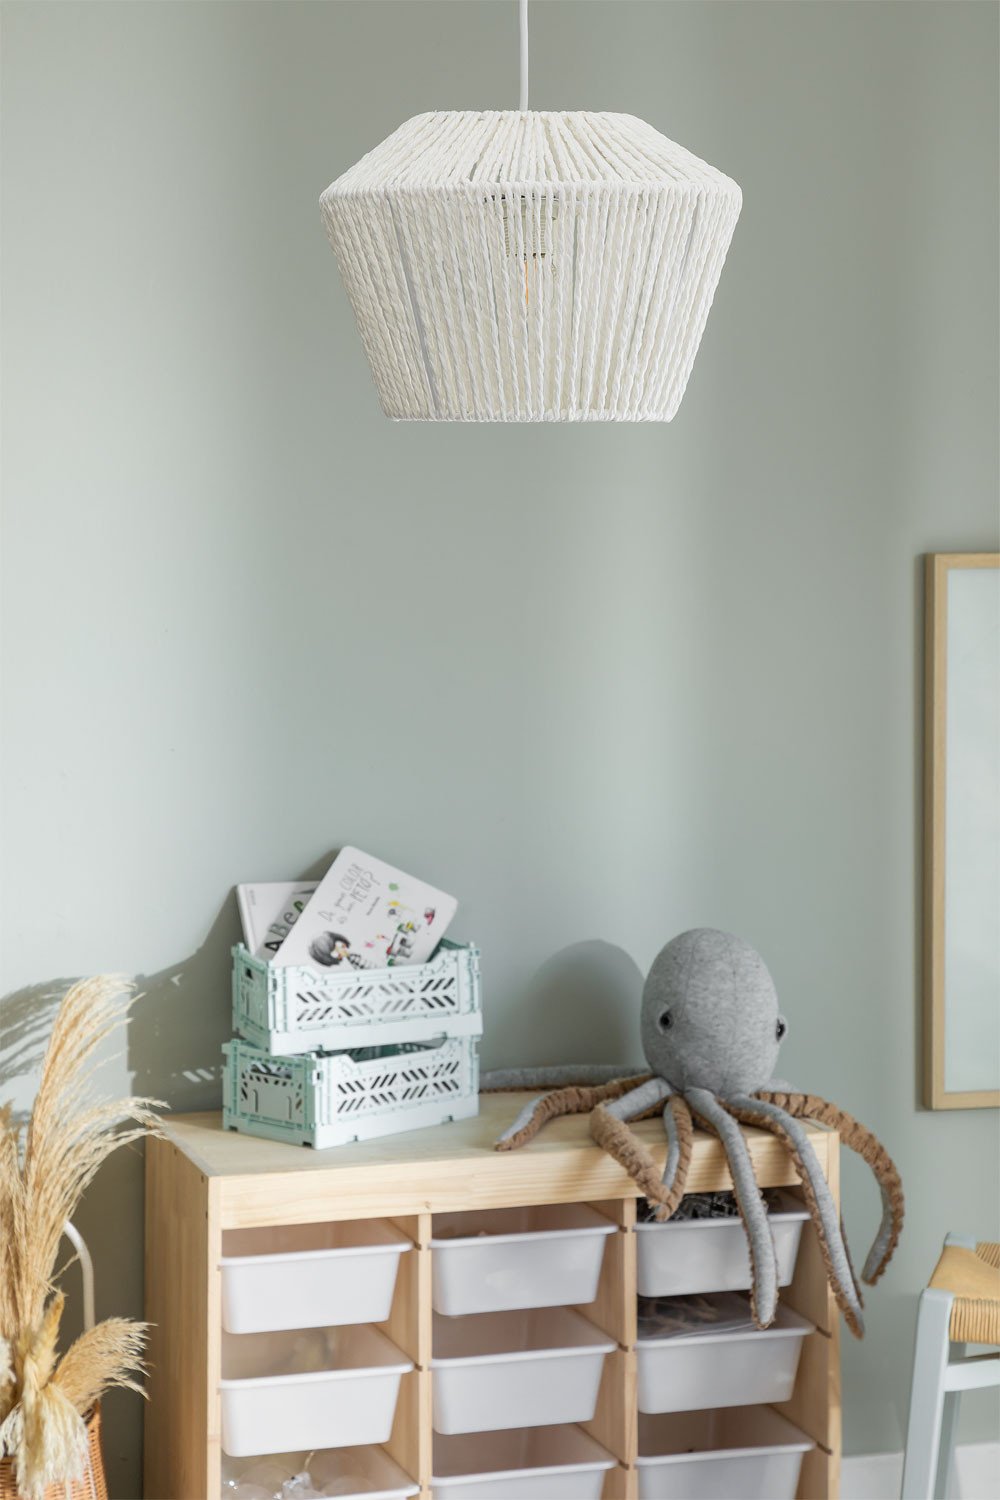 Braided Paper Ceiling Lamp Libel , gallery image 2